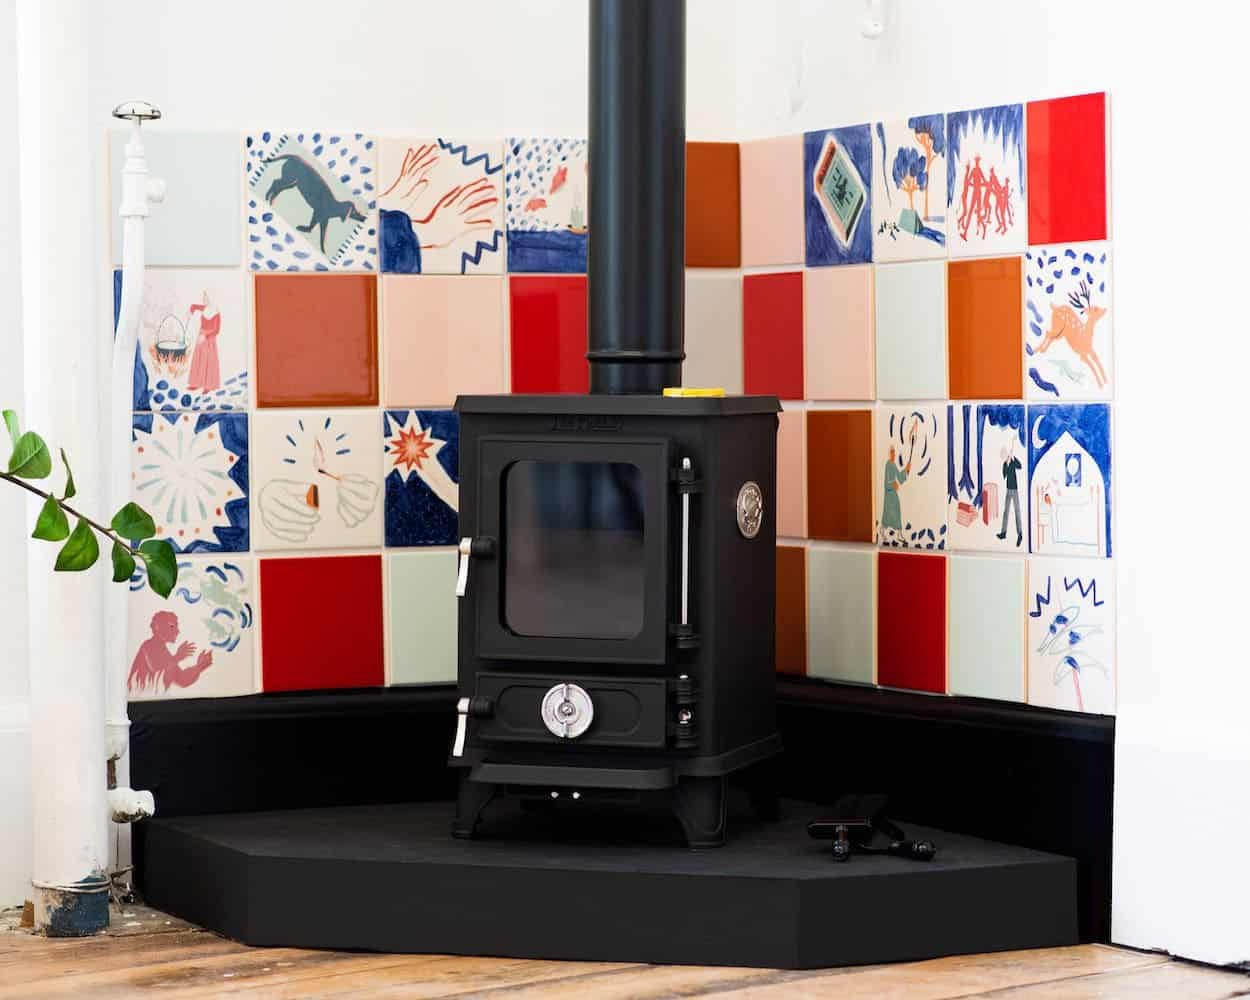 Salamander Stoves Small Wood Burning Stoves For Victorian Fireplaces Tiles Told Case Study Image 1